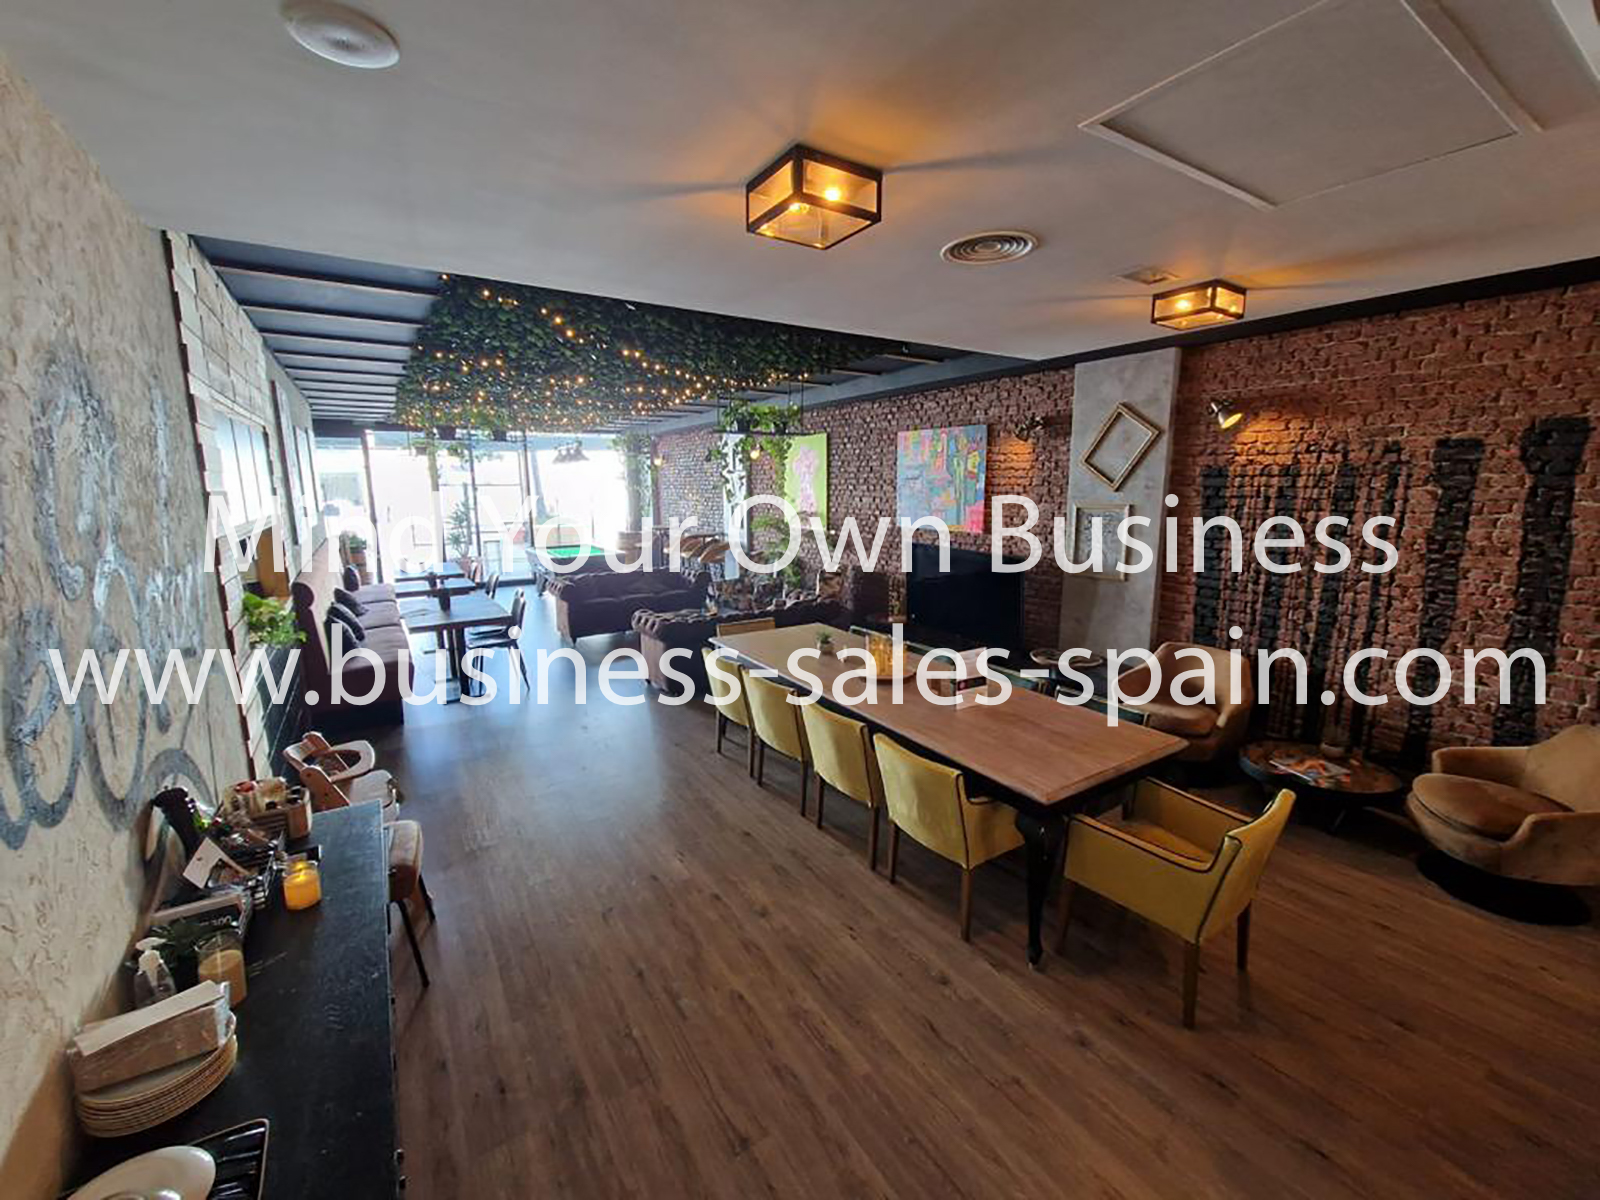 Very Stylish Restaurant & Bar in Prime Marbella Location With Excellent Potential